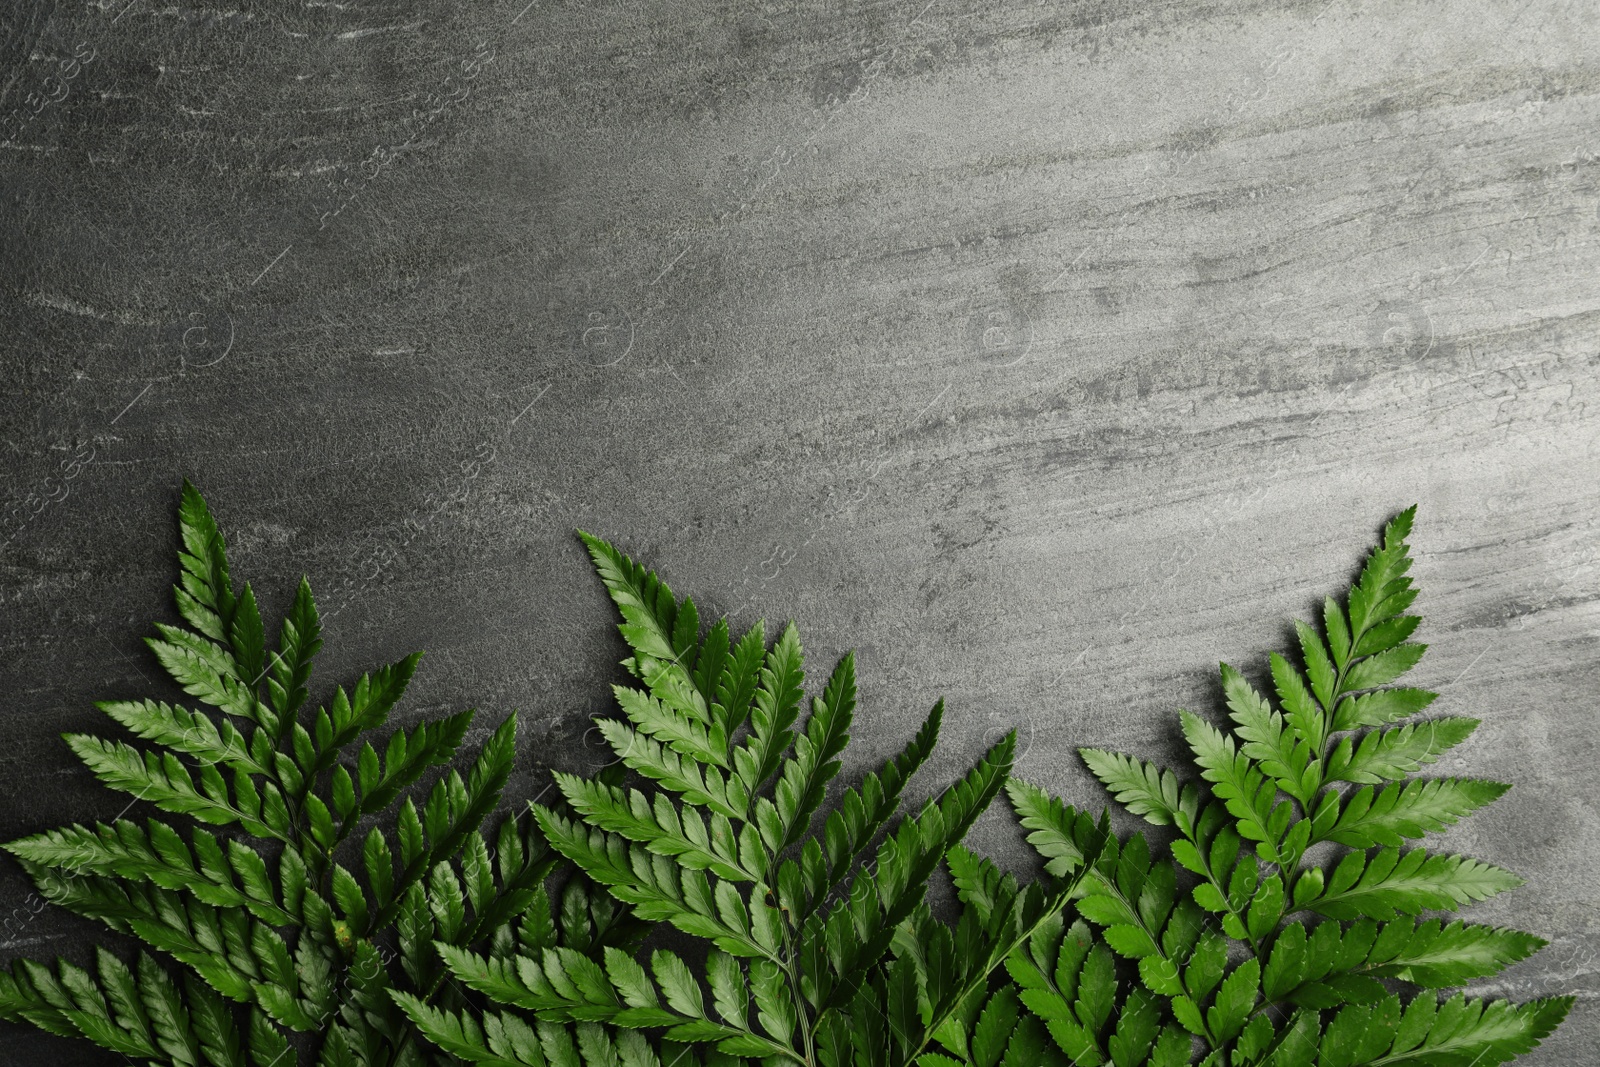 Photo of Beautiful tropical fern leaves on grey stone background, flat lay. Space for text